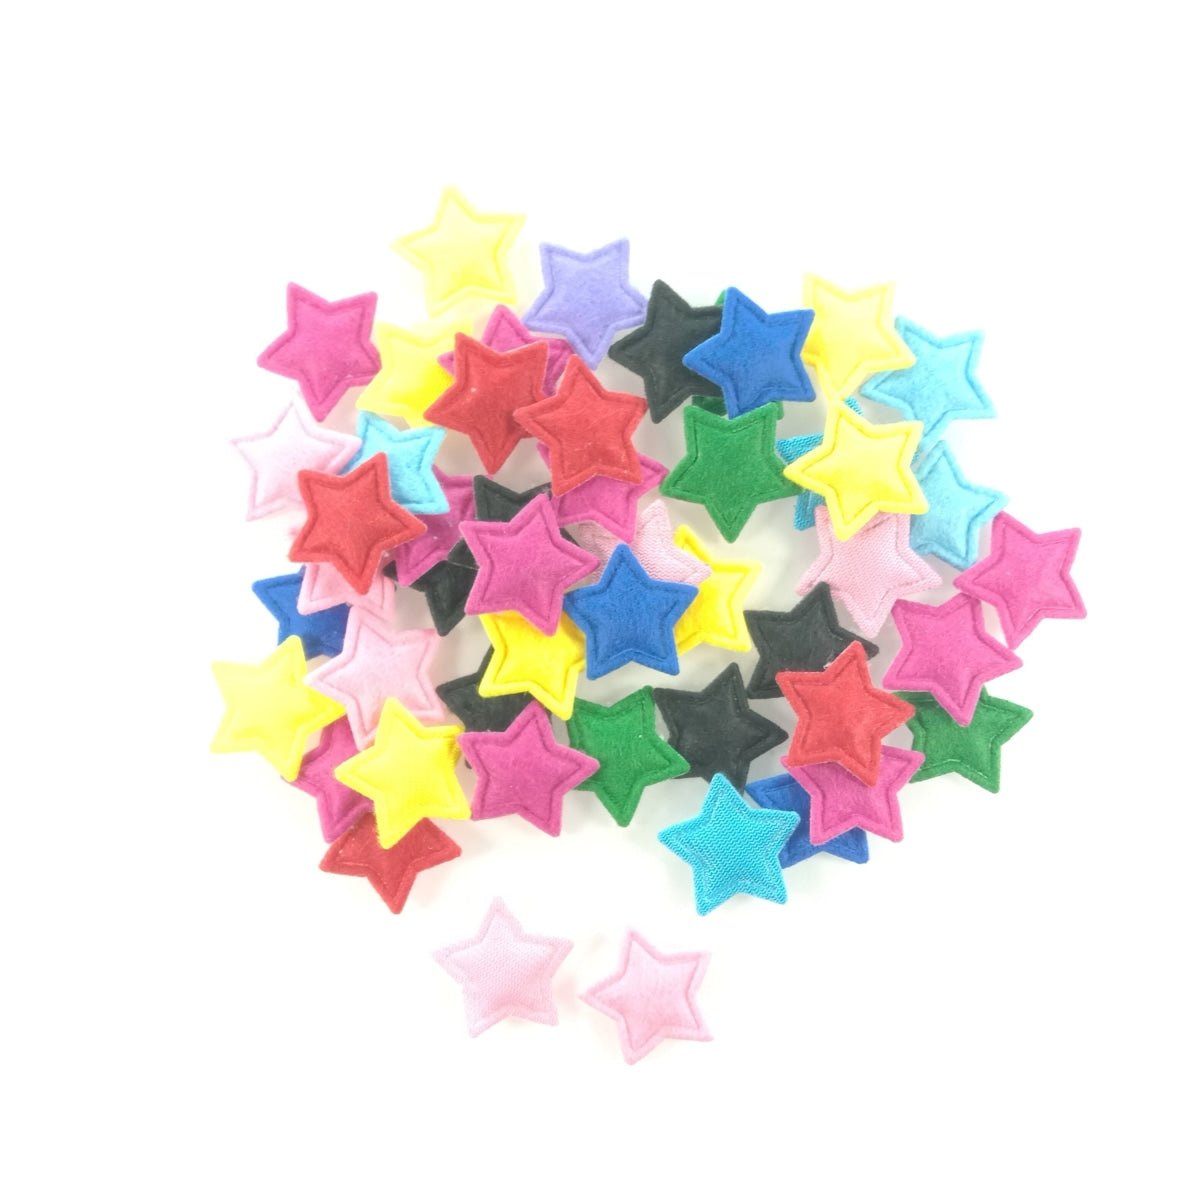 100pcs 2.5cm Fluffy Felt Cloth Stars Padded Appliques Kids Sewing Scrapbooking DIY Crafts Shapes - Asia Sell